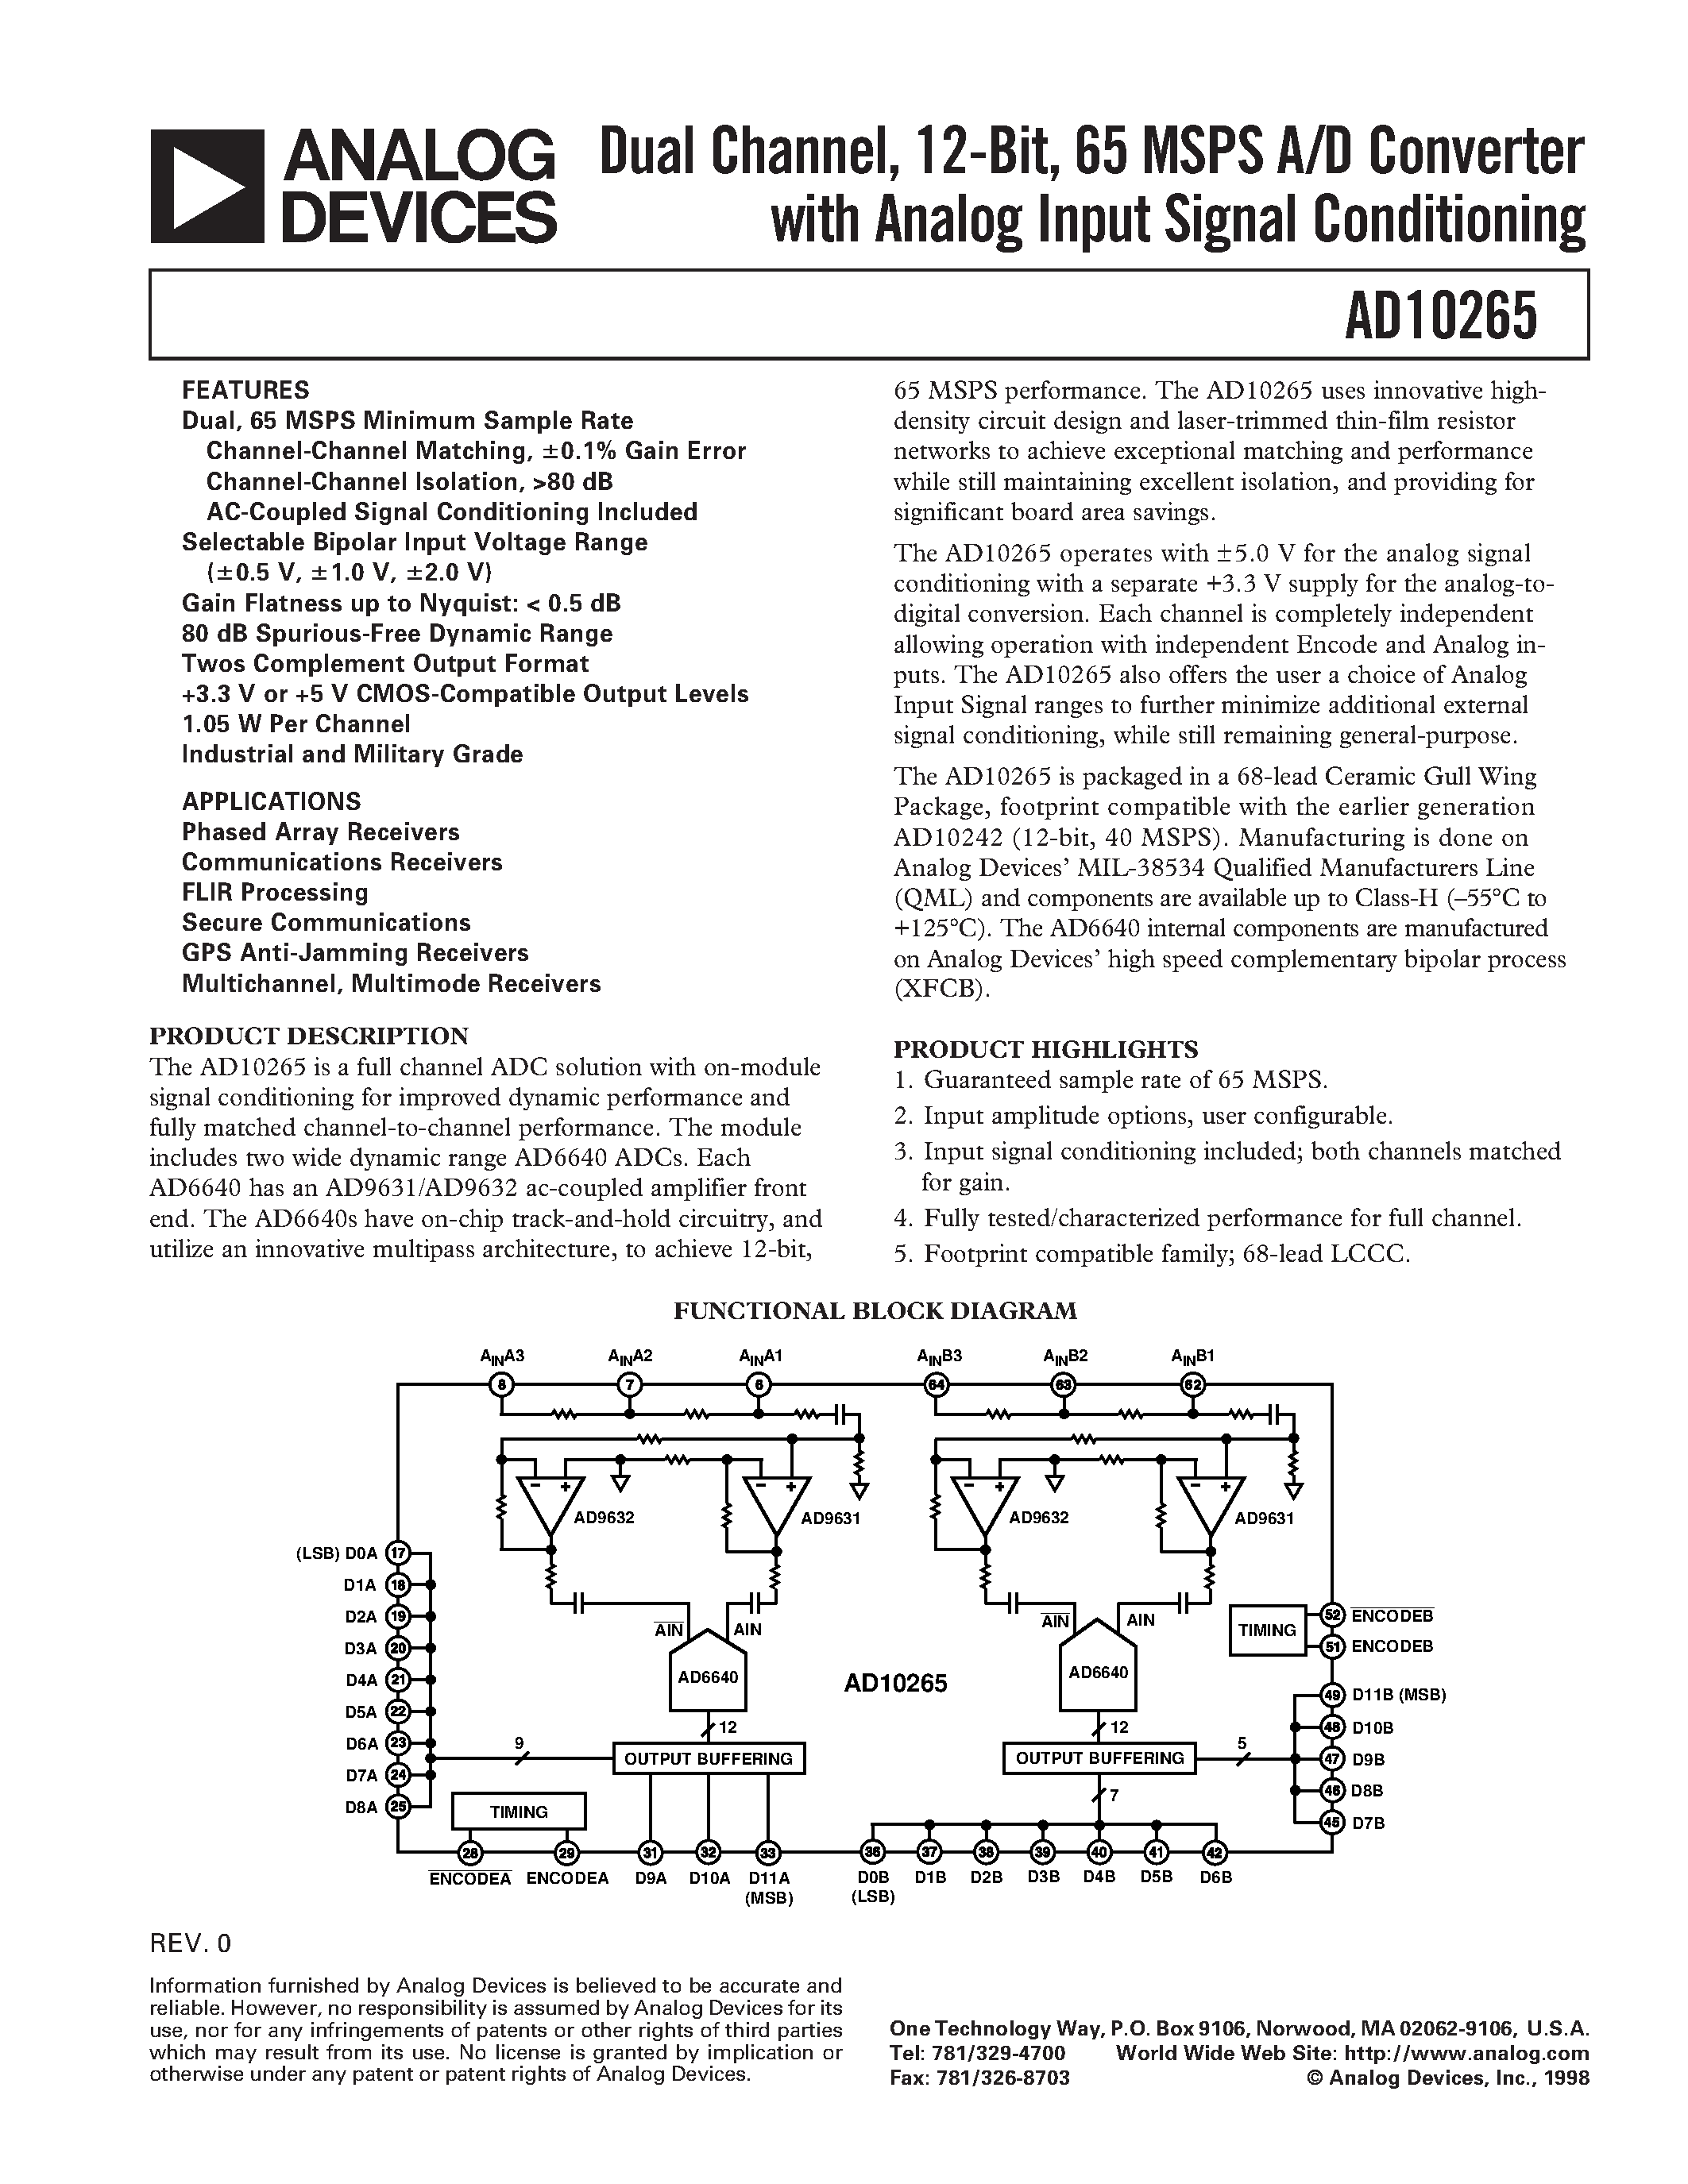 Datasheet AD10265 - Dual Channel/ 12-Bit/ 65 MSPS A/D Converter with Analog Input Signal Conditioning page 1